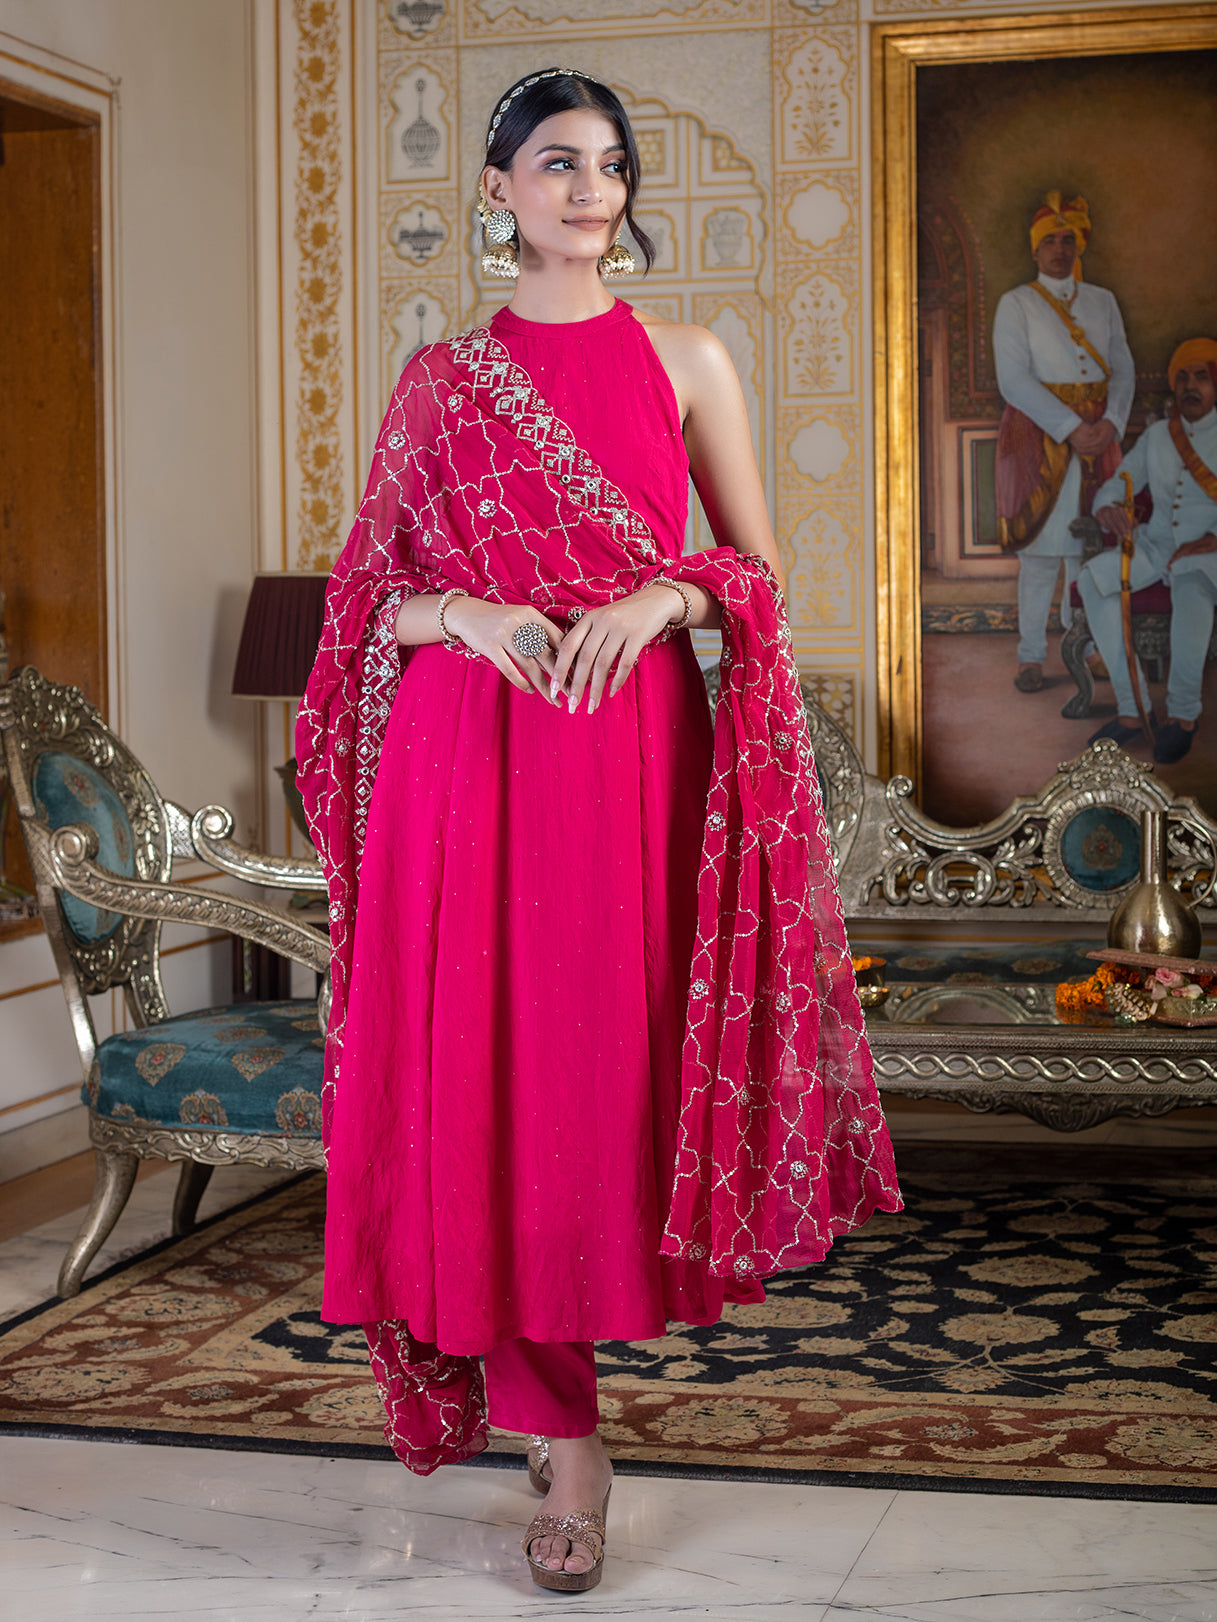 elevate-your-style-with-our-pink-halter-neck-kurta-set-paired-with-a-stunning-sequin-embroidered-dupatta-effortless-glam-and-grace-in-one-ensemble